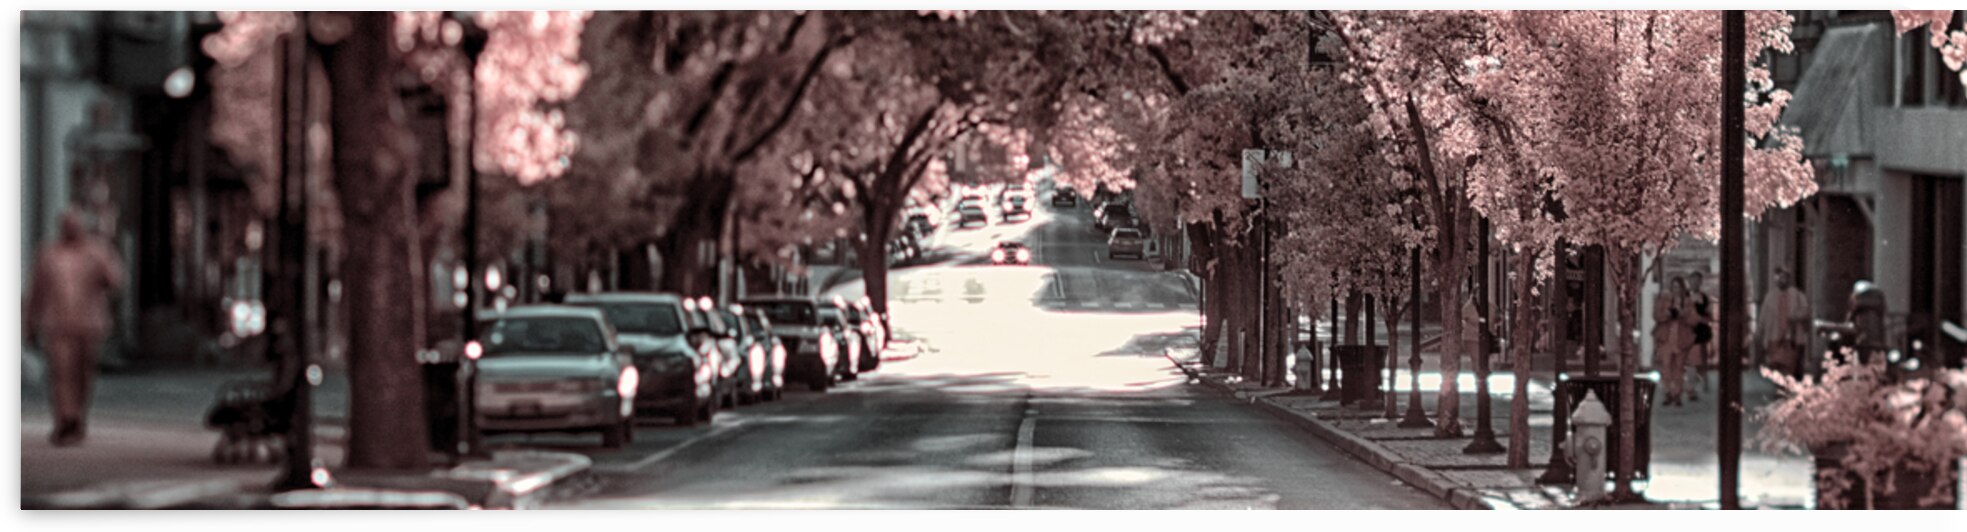 City in Bloom: Yorks Stroll Through Infrared Hues - Pano by Dream World Images